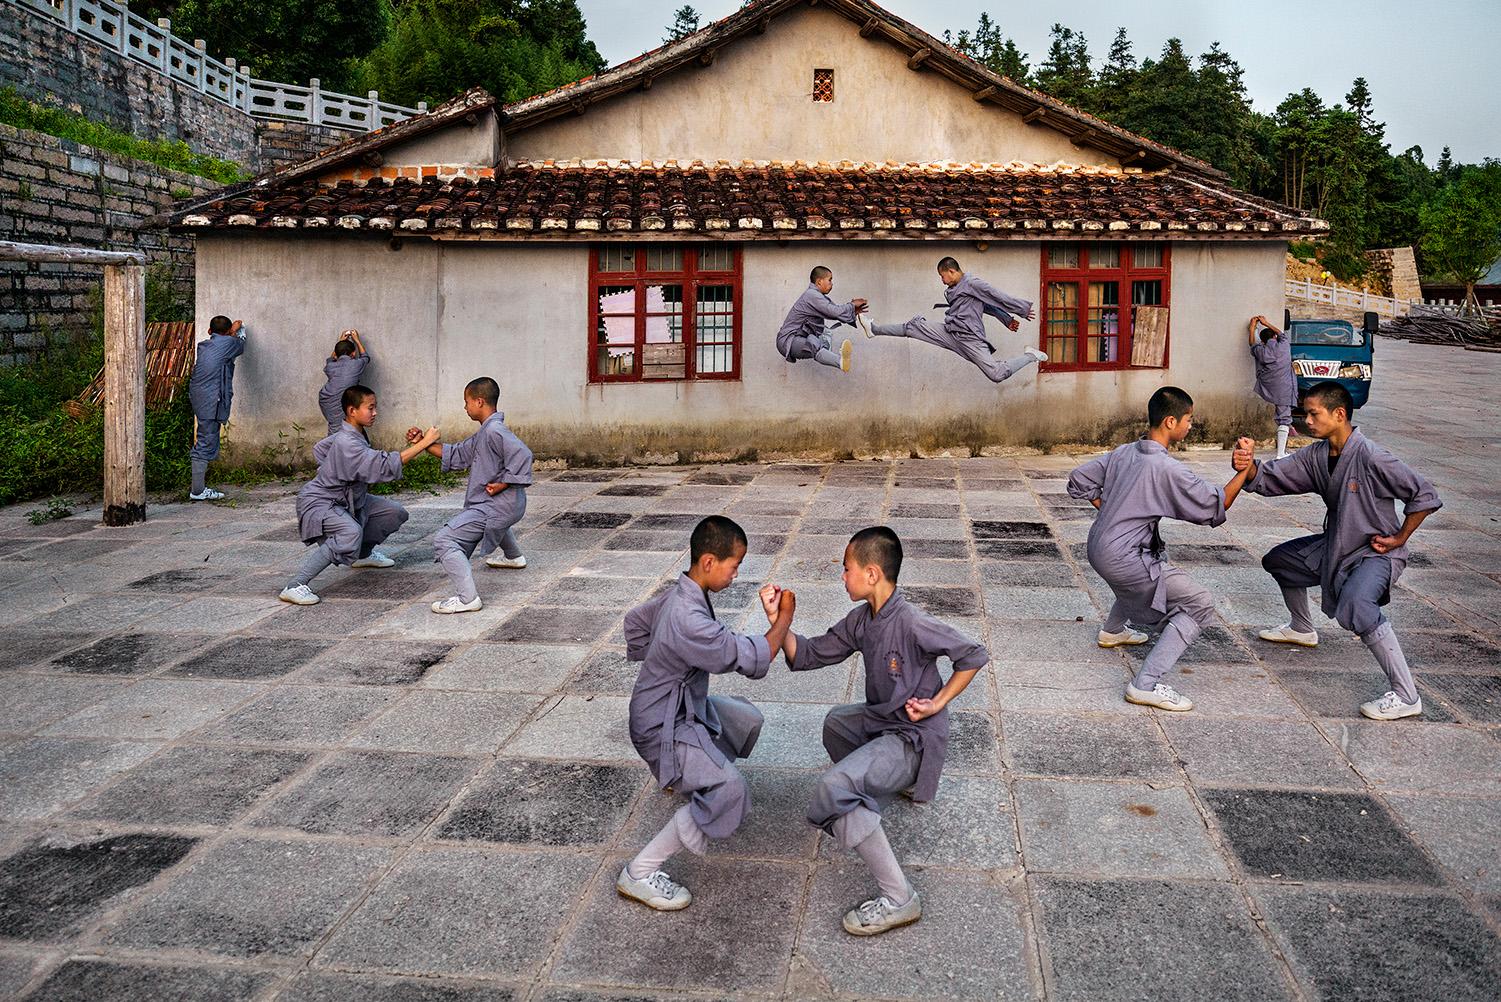 Steve McCurry Figurative Photograph - Young Practitioners of the Shaolin Tagou Martial Arts School